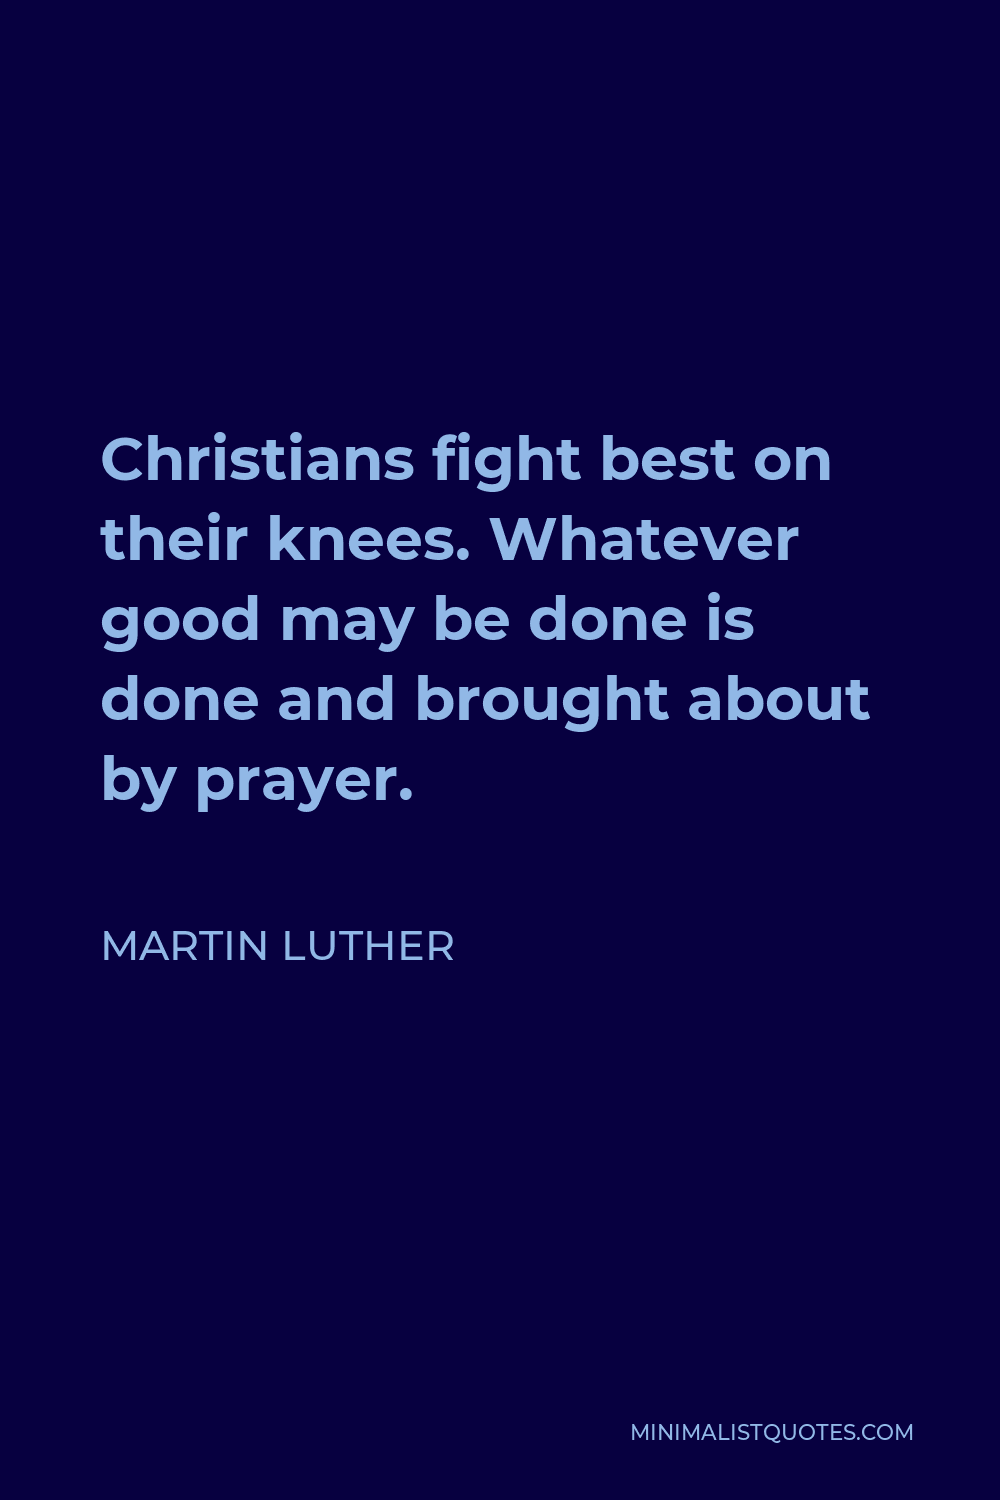 Martin Luther Quote - Christians fight best on their knees. Whatever good may be done is done and brought about by prayer.